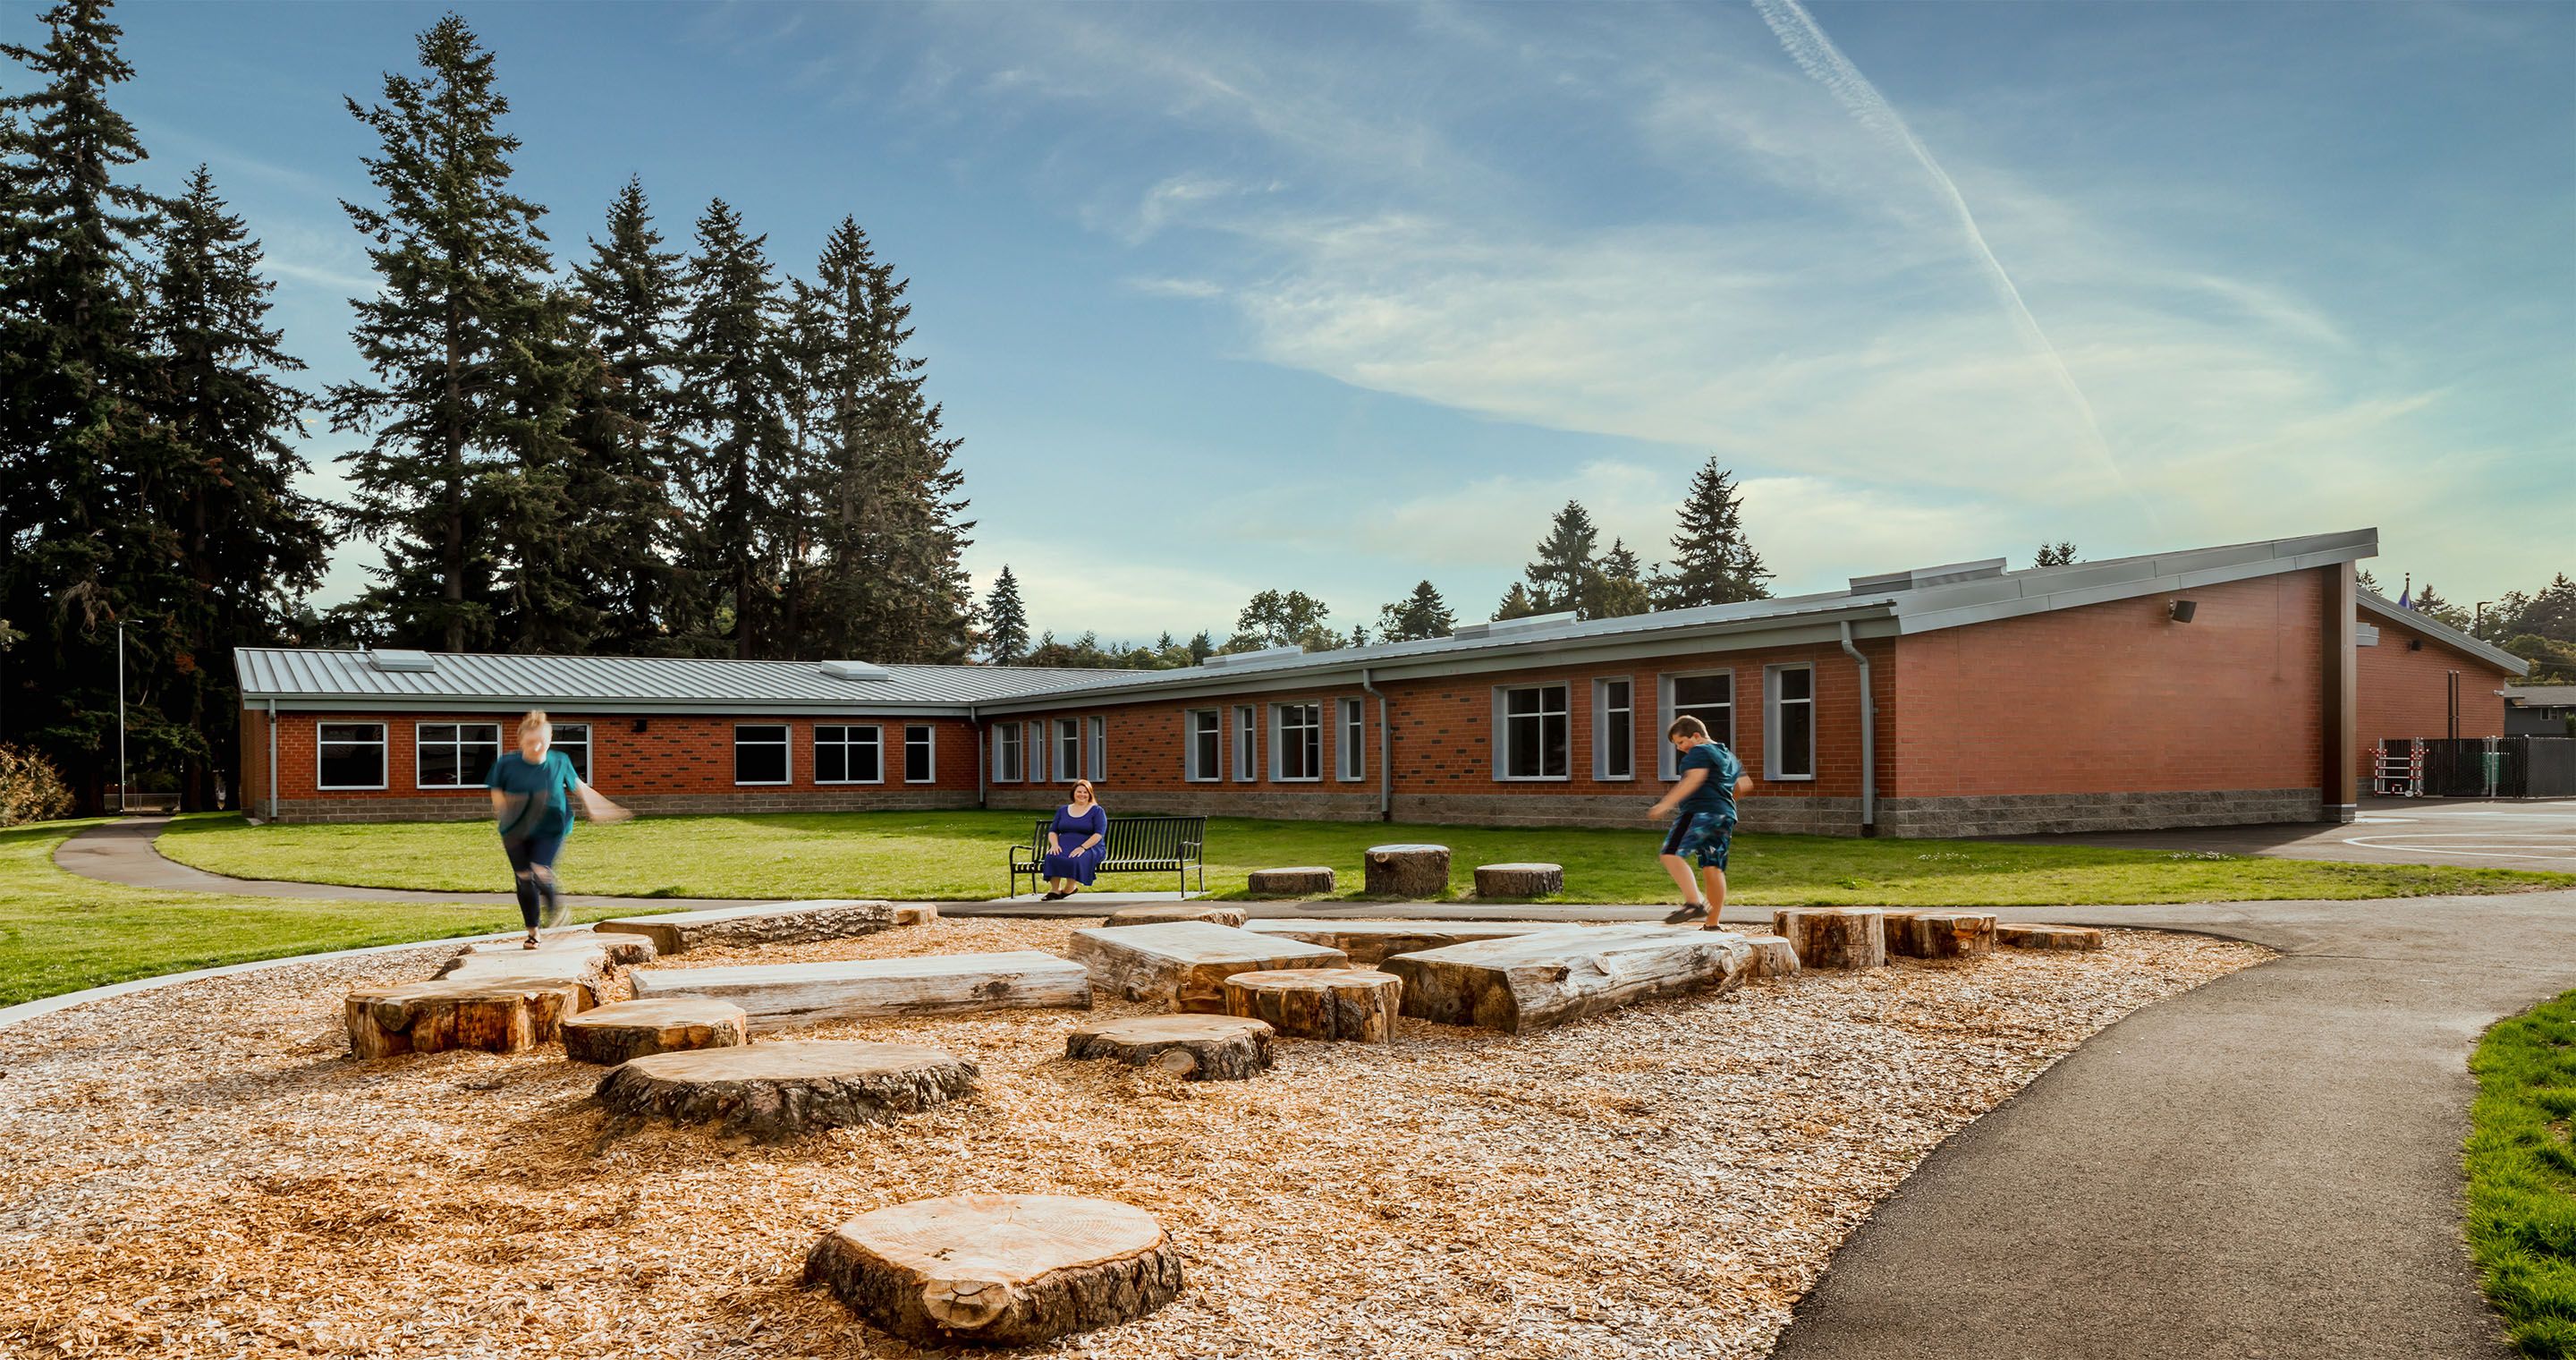 The Jim Tangeman Center (previously Fir Grove) provides a specialized educational program for students grades 1 through 12 in Vancouver, Washington. Designed by LSW Architects, the school focuses on emotional and behavioral self-regulation. 